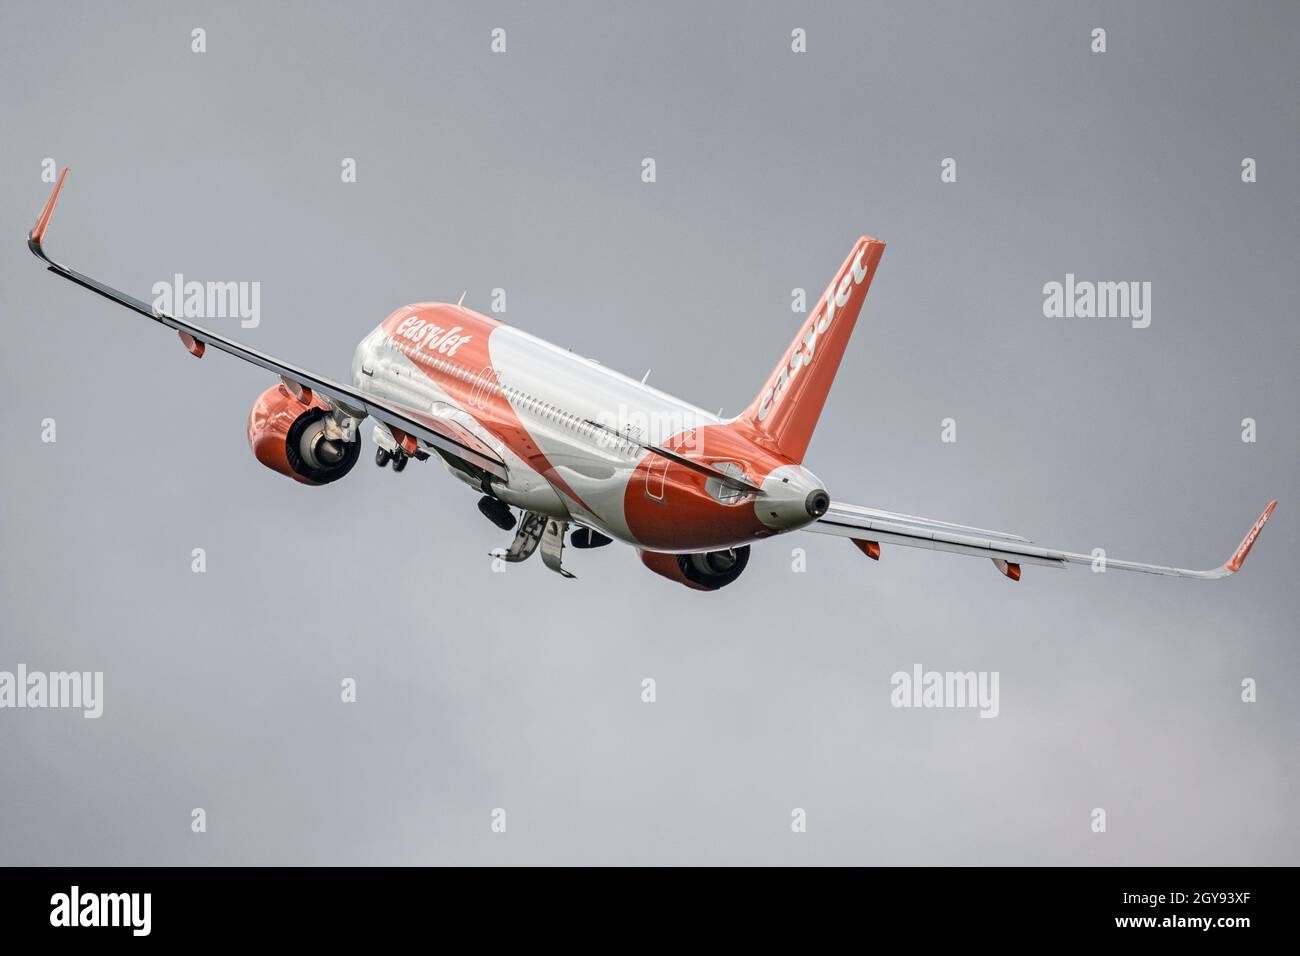 Easyjet Airbus A320 NEO Airliner, G-UZLL, taking off from Bristol Lulsgate Airport, England. Stock Photo